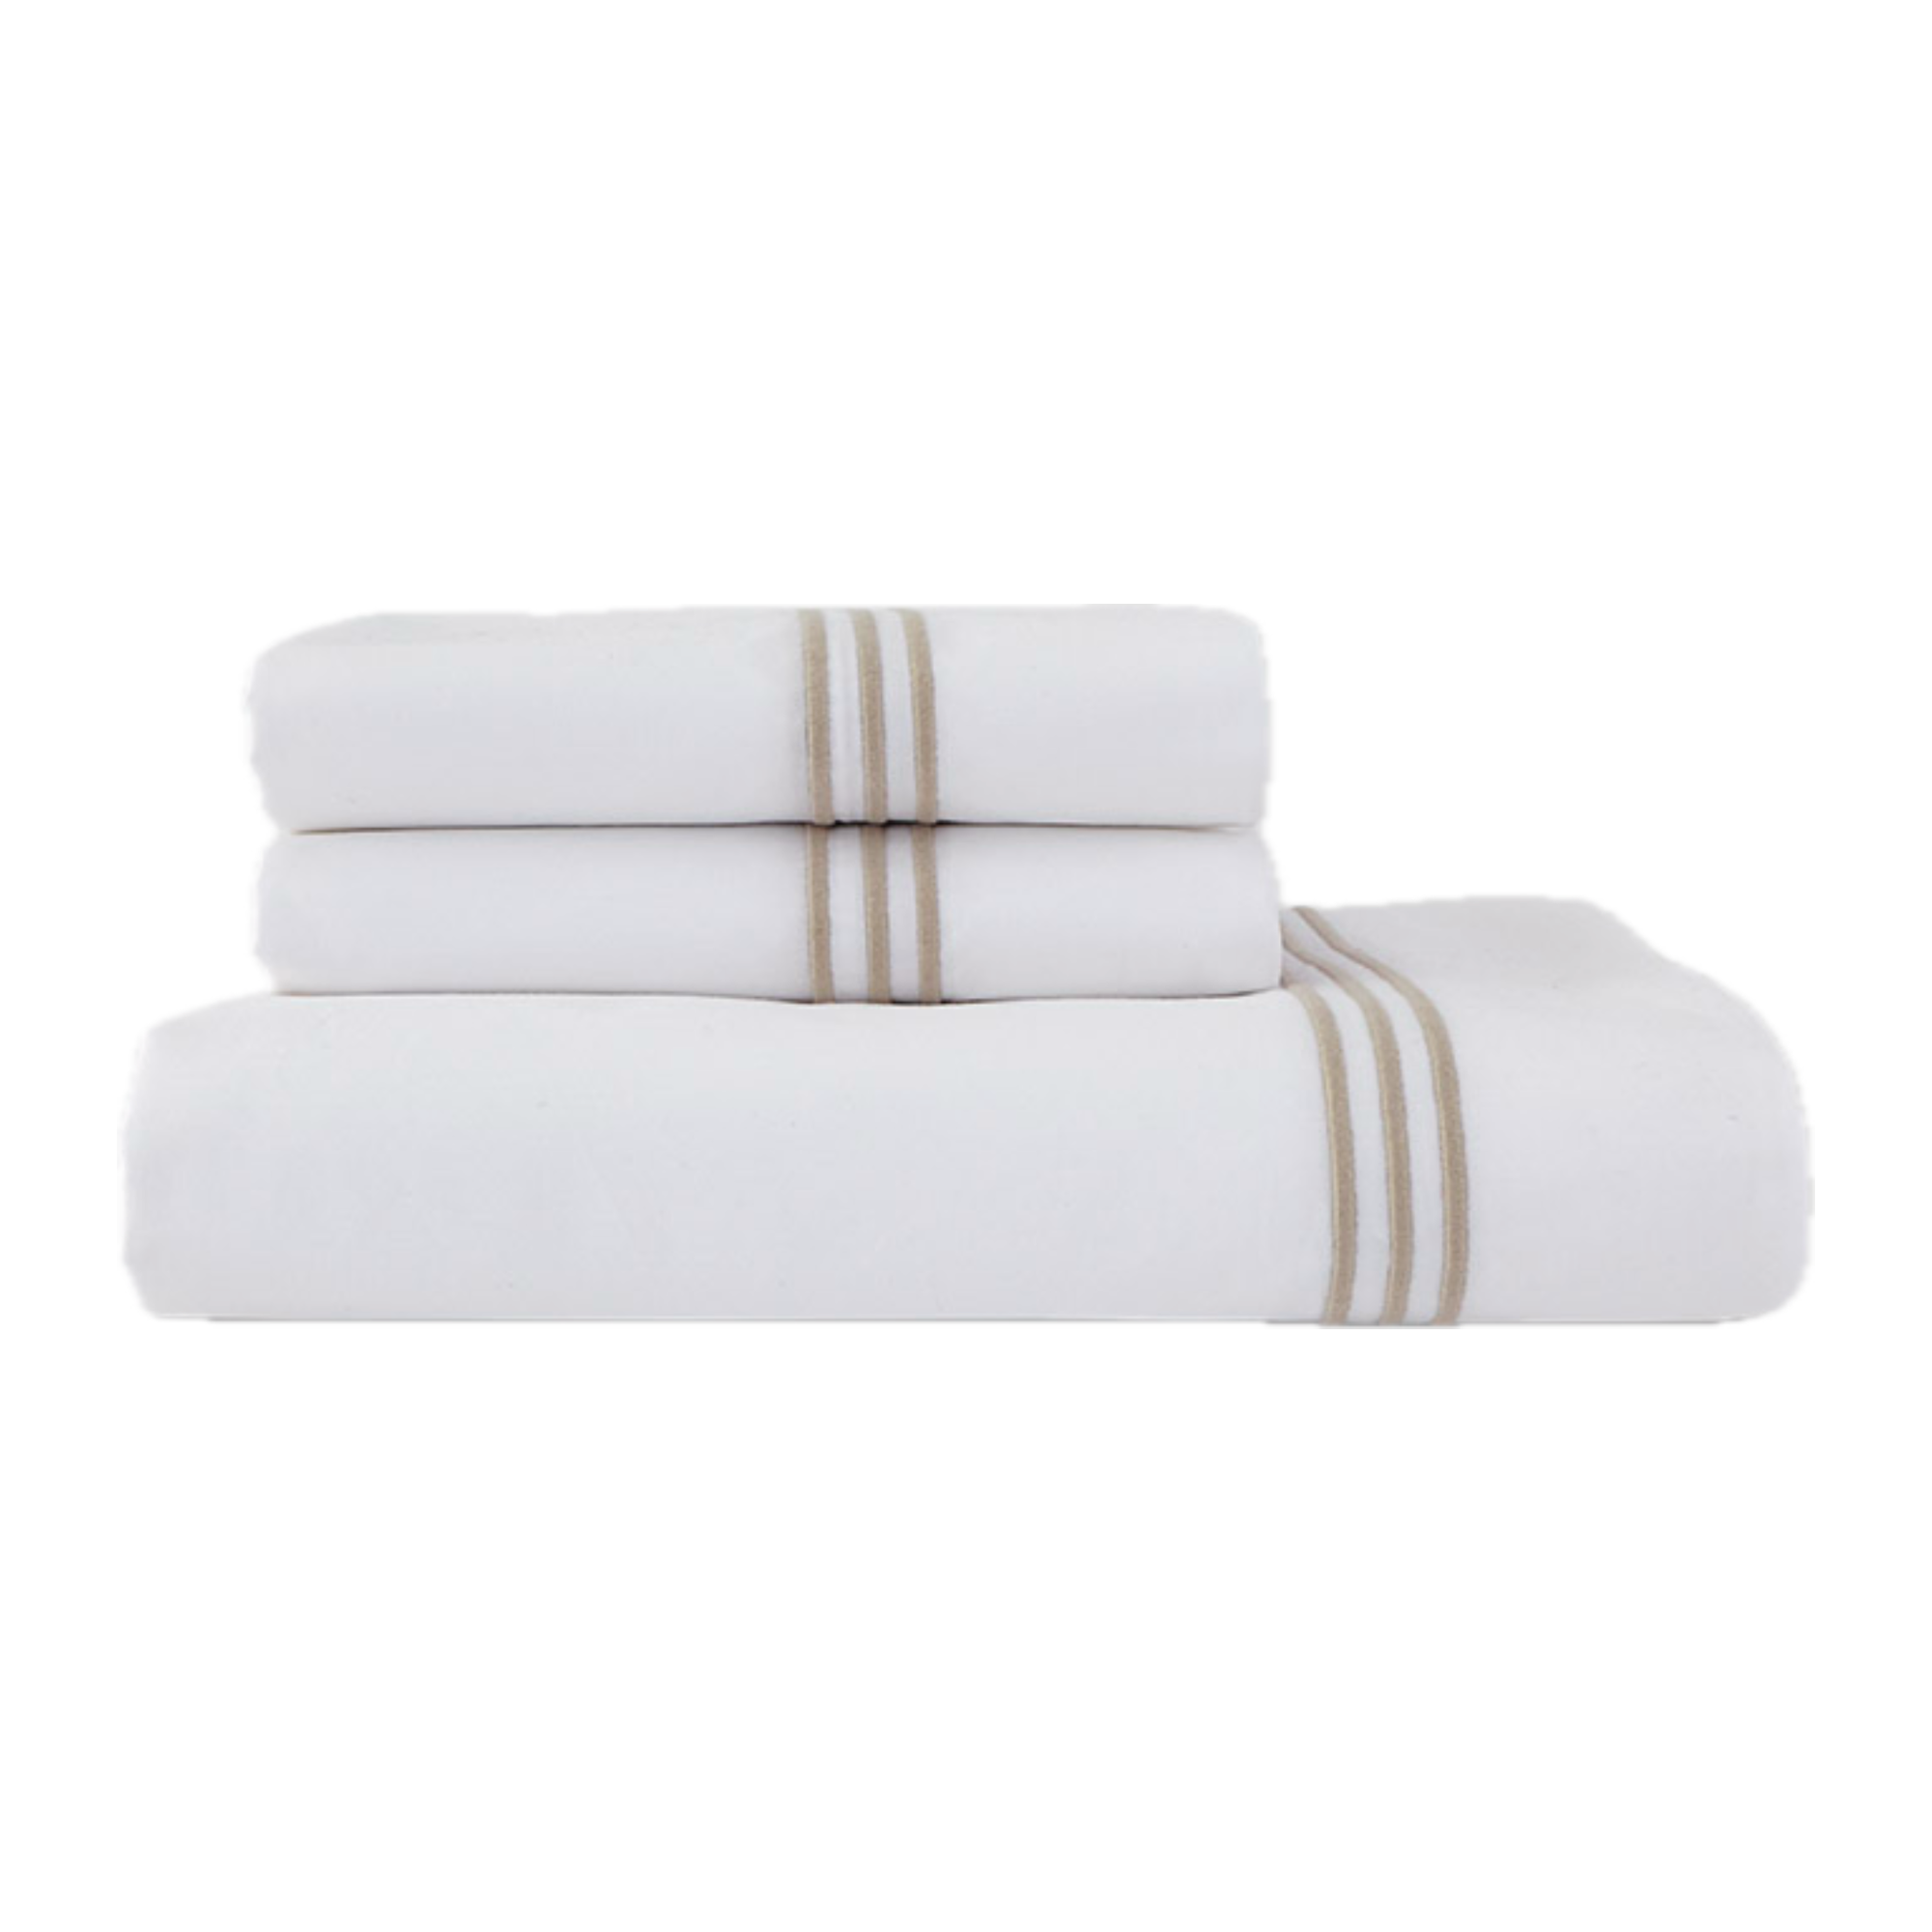 Sheet Set Stack of Downtown Company Madison Bedding Collection in Taupe Color